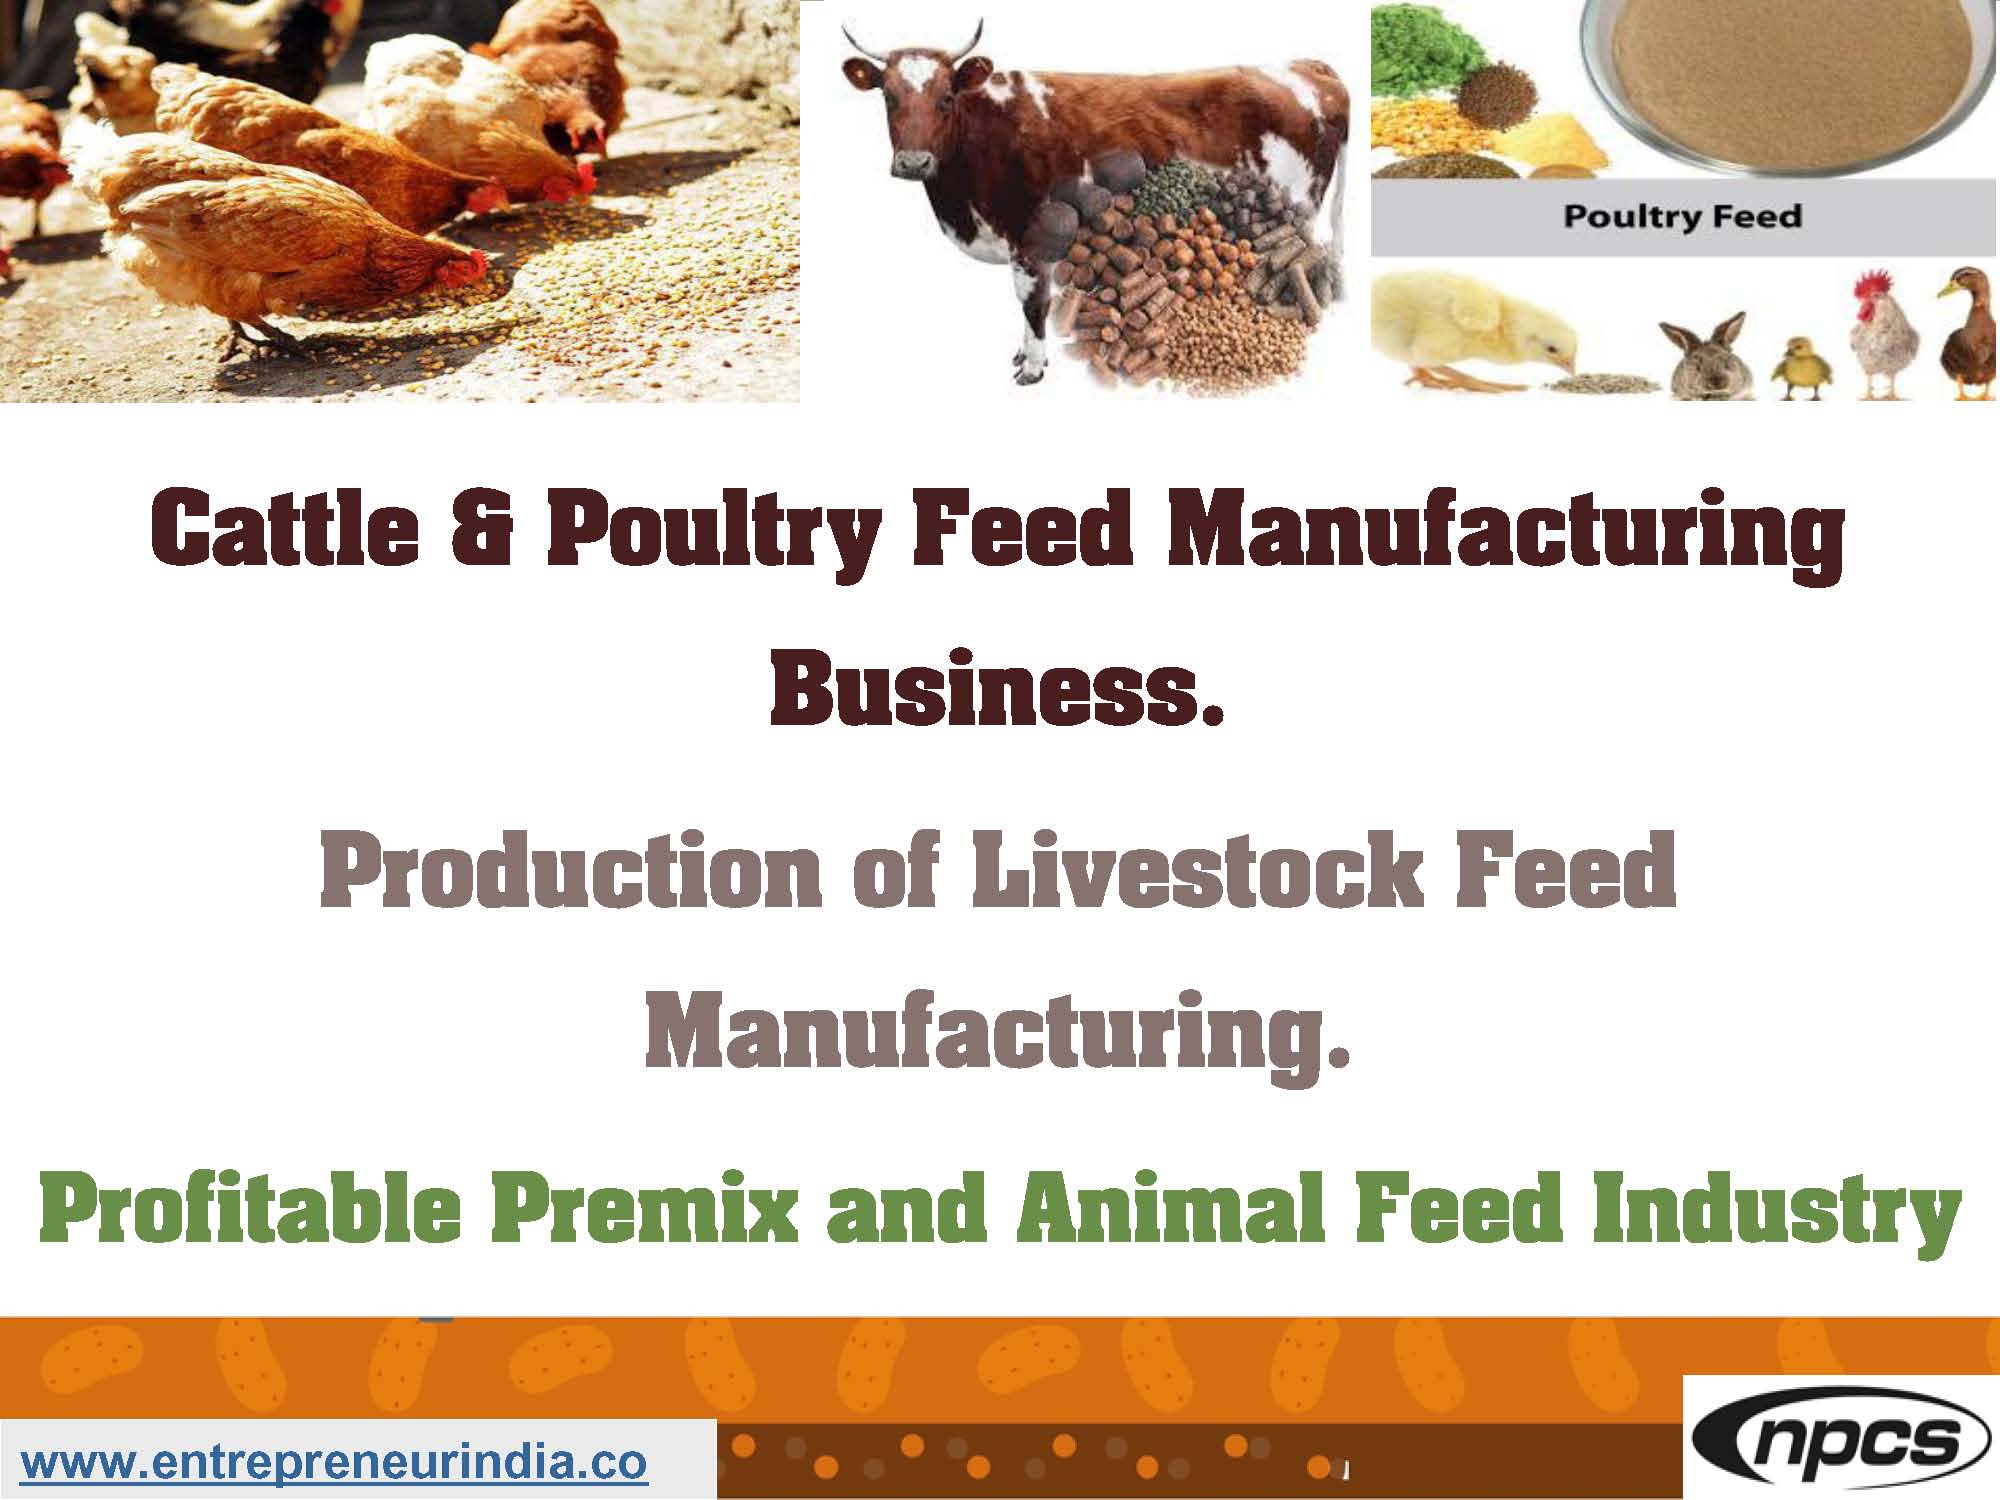 Cattle & Poultry Feed Manufacturing Business